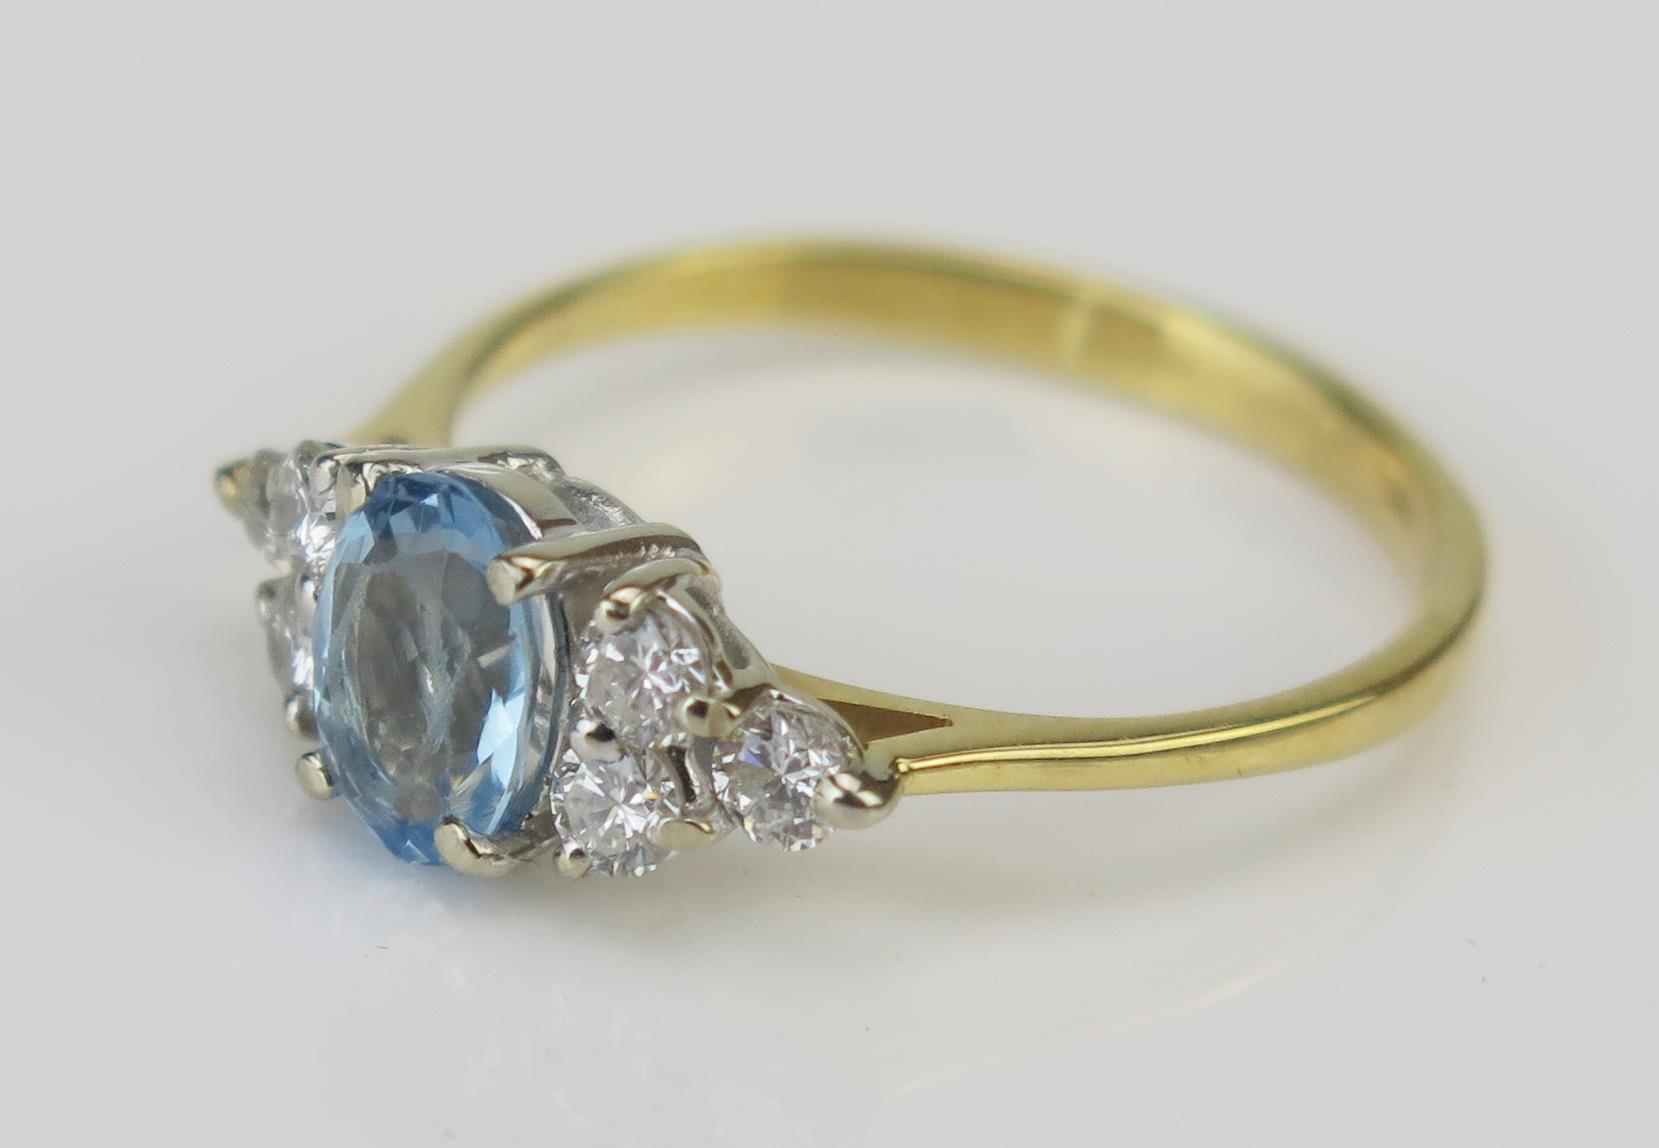 An 18ct Gold, Diamond and Blue Stone Ring, c. 15.7x7mm head, stamped 750 with London import marks, - Image 2 of 2